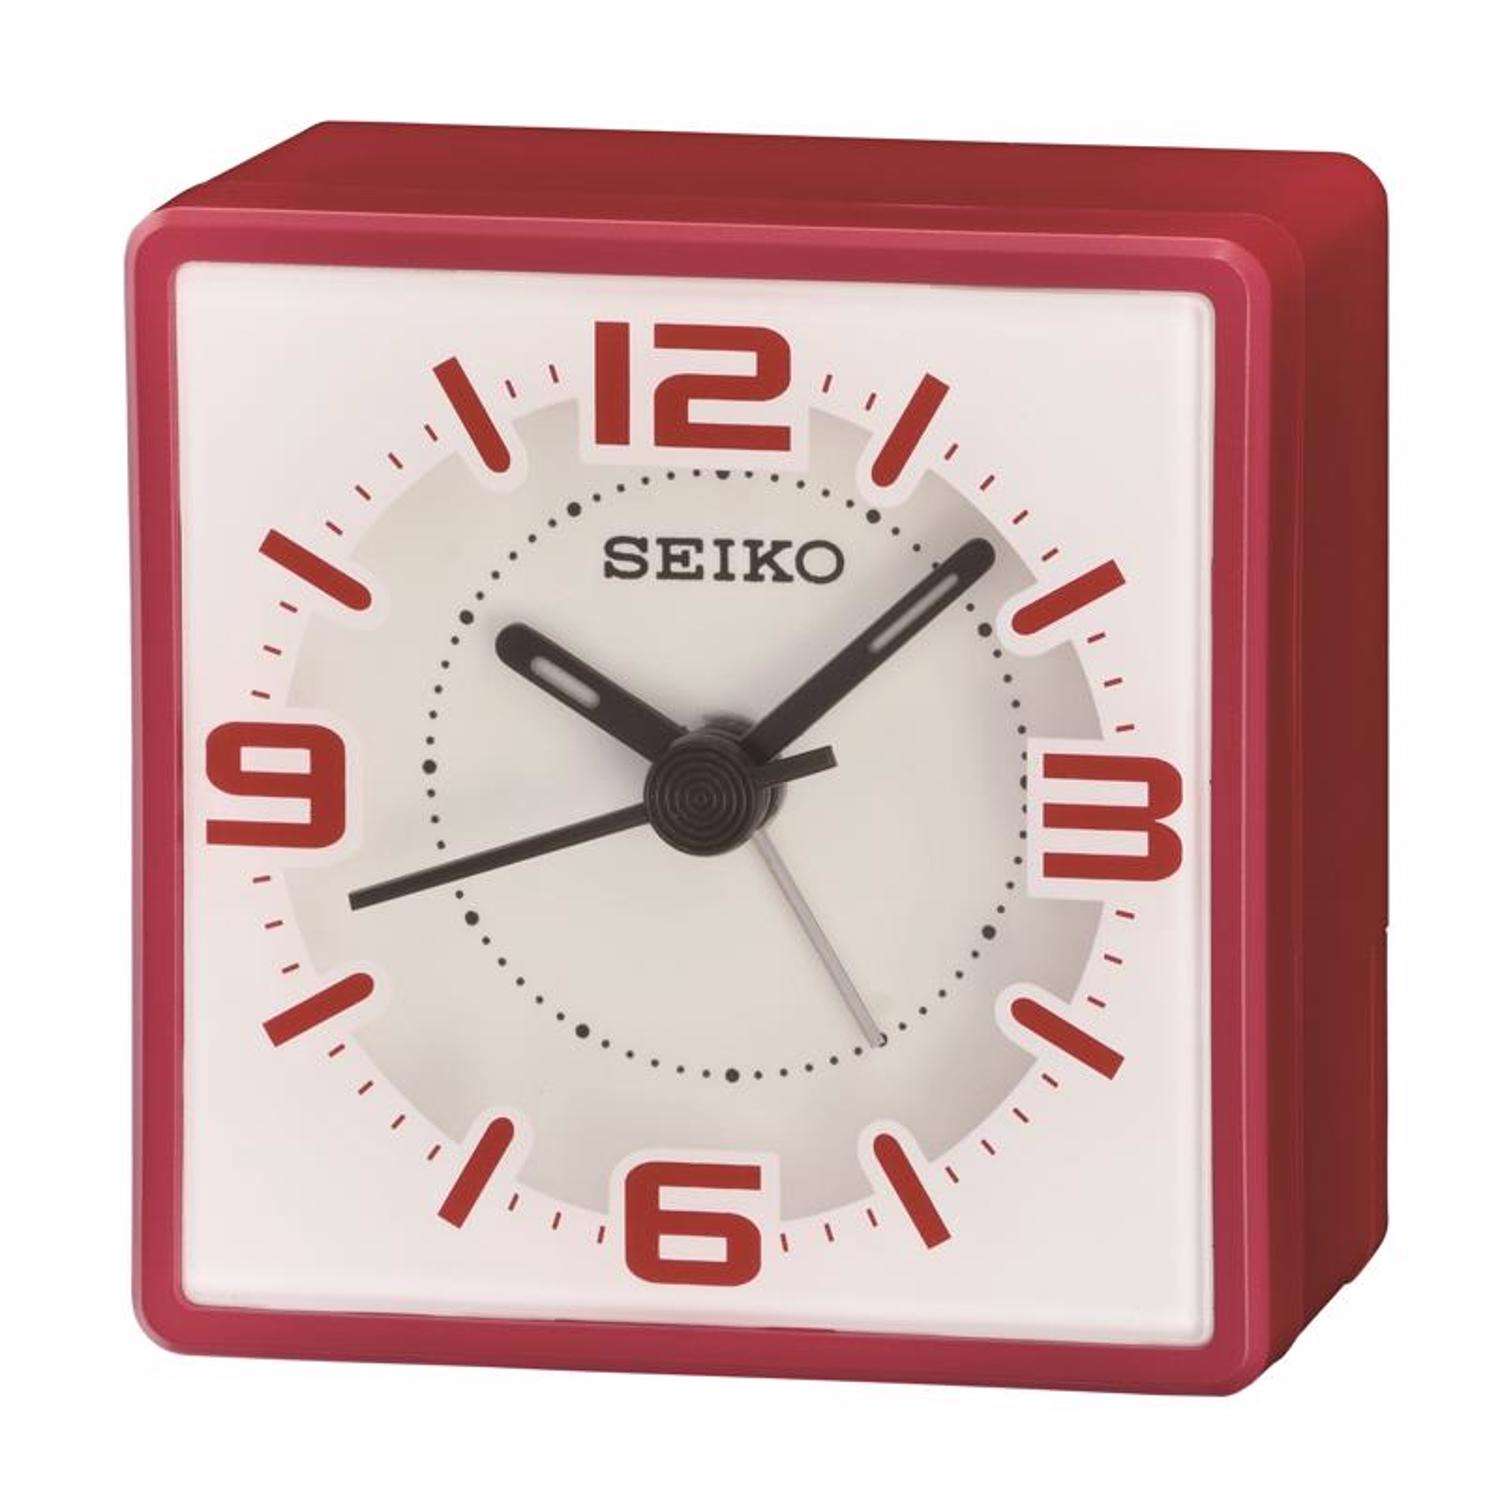 Seiko  in. Red Alarm Clock Analog Battery Operated - Ace Hardware